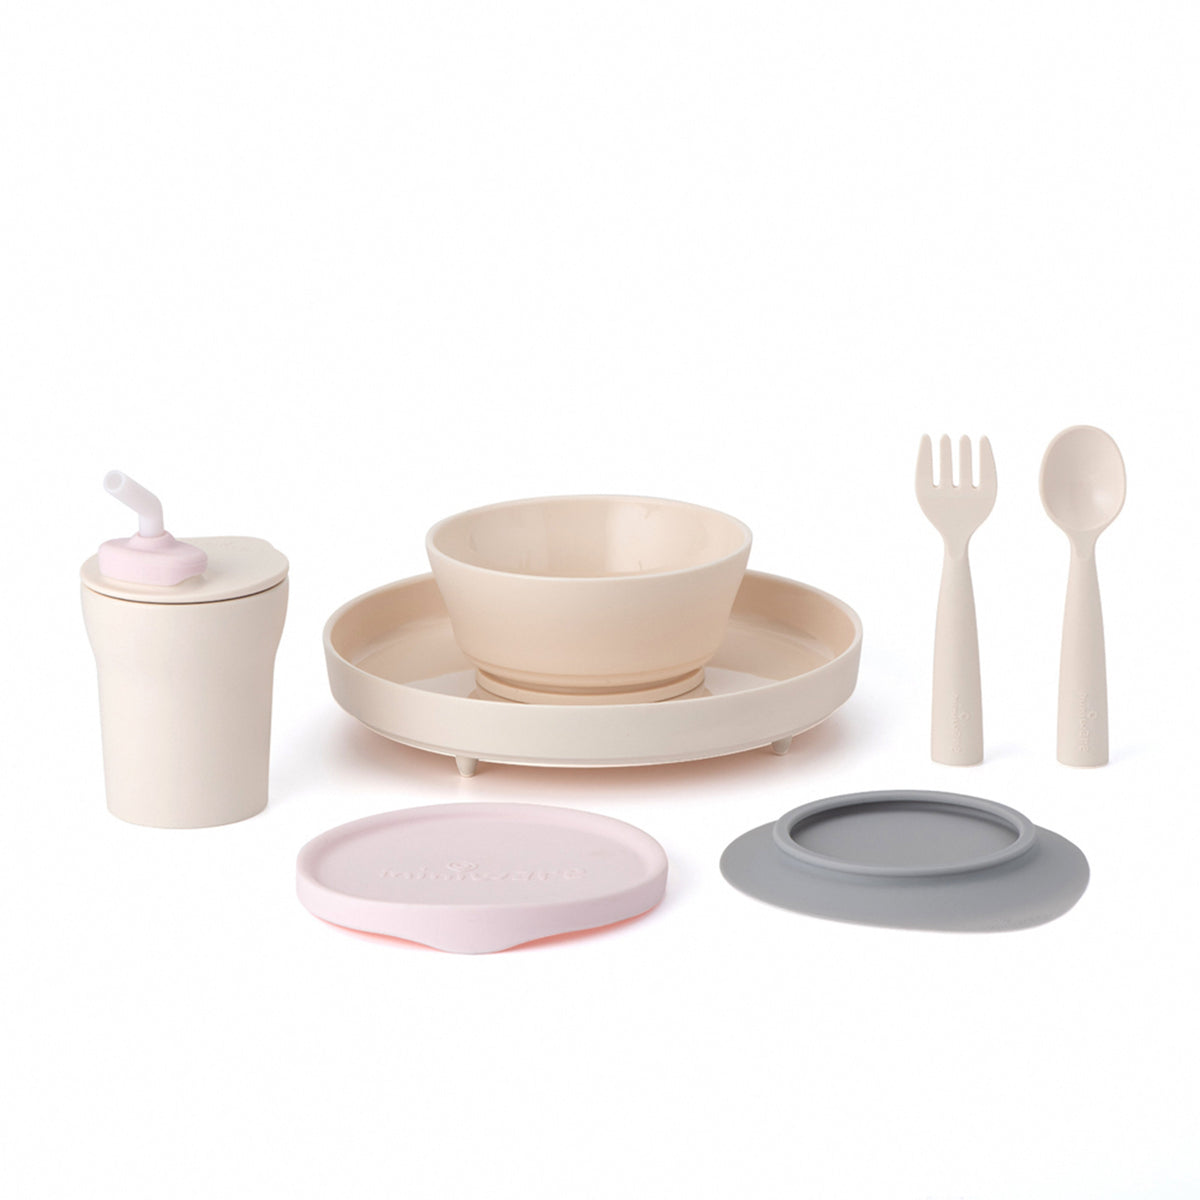 miniware-little-foodie-pla-suction-bowl-+-plate-+-cutlery-set-+-silicone-cover-in-cotton-candy-+-sippy-cup-set- (2)